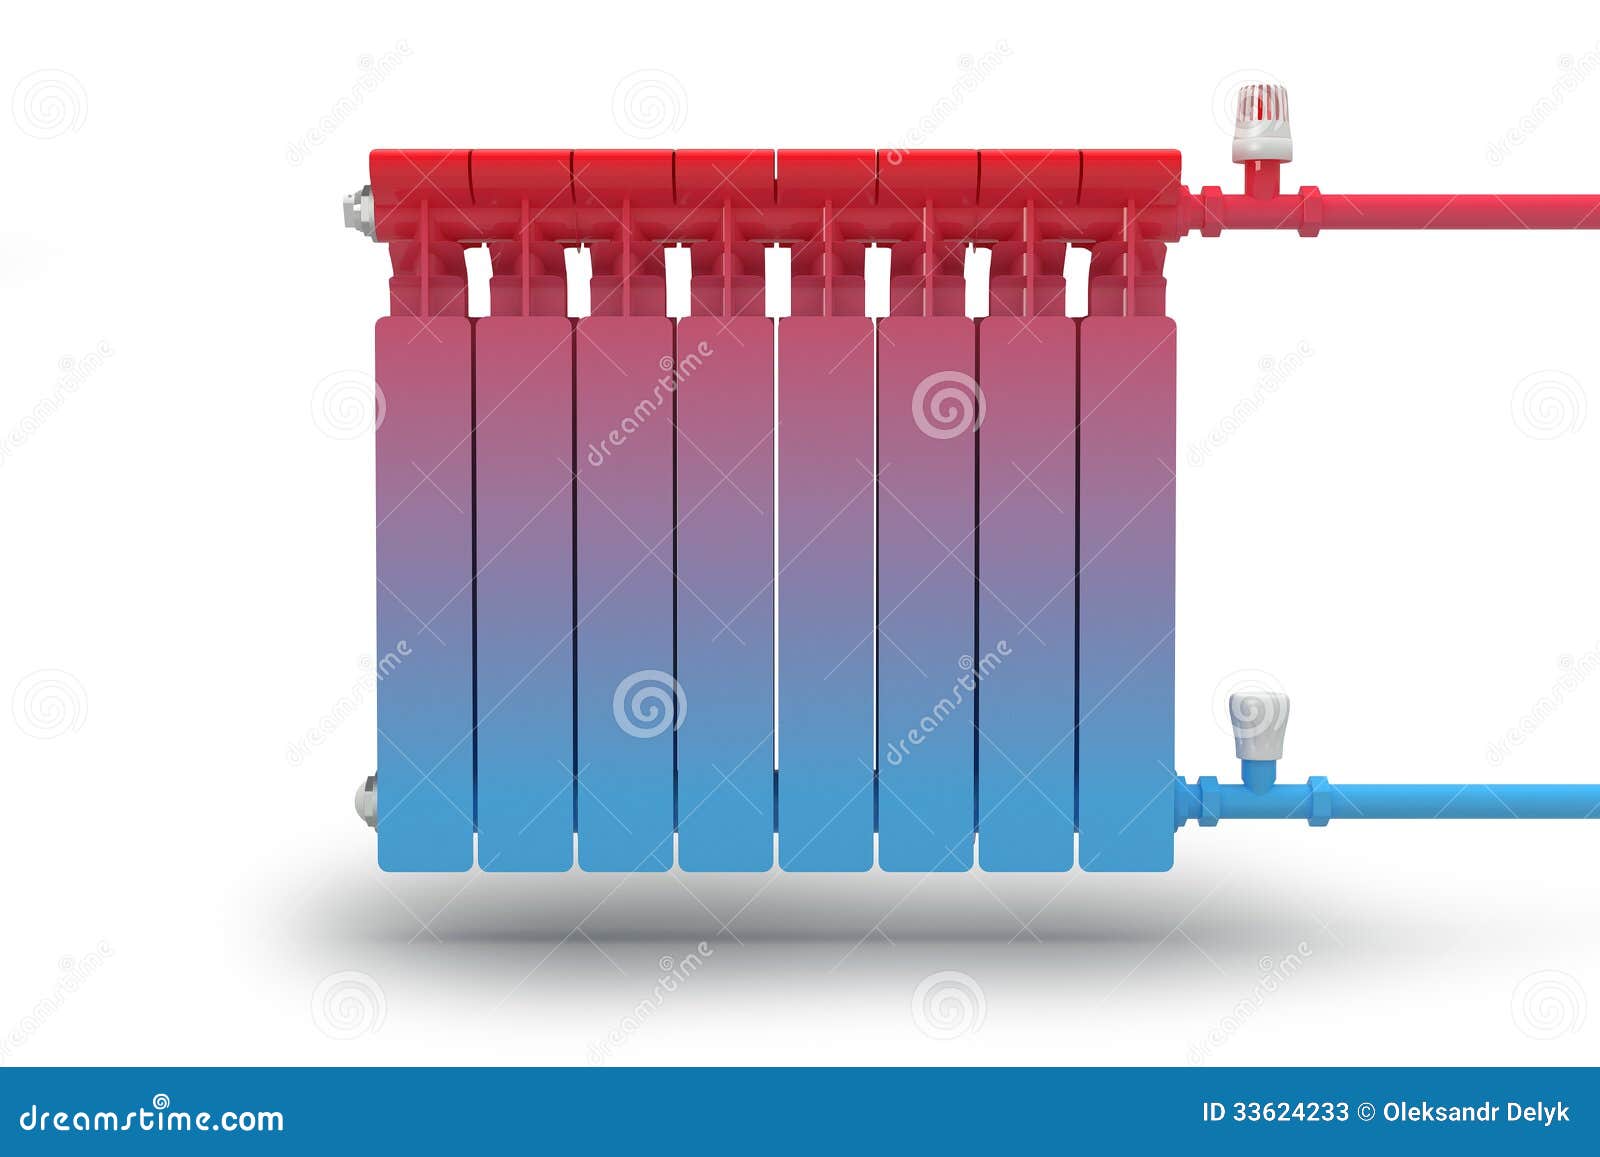 the circulation of heat flow in the radiator heating system.